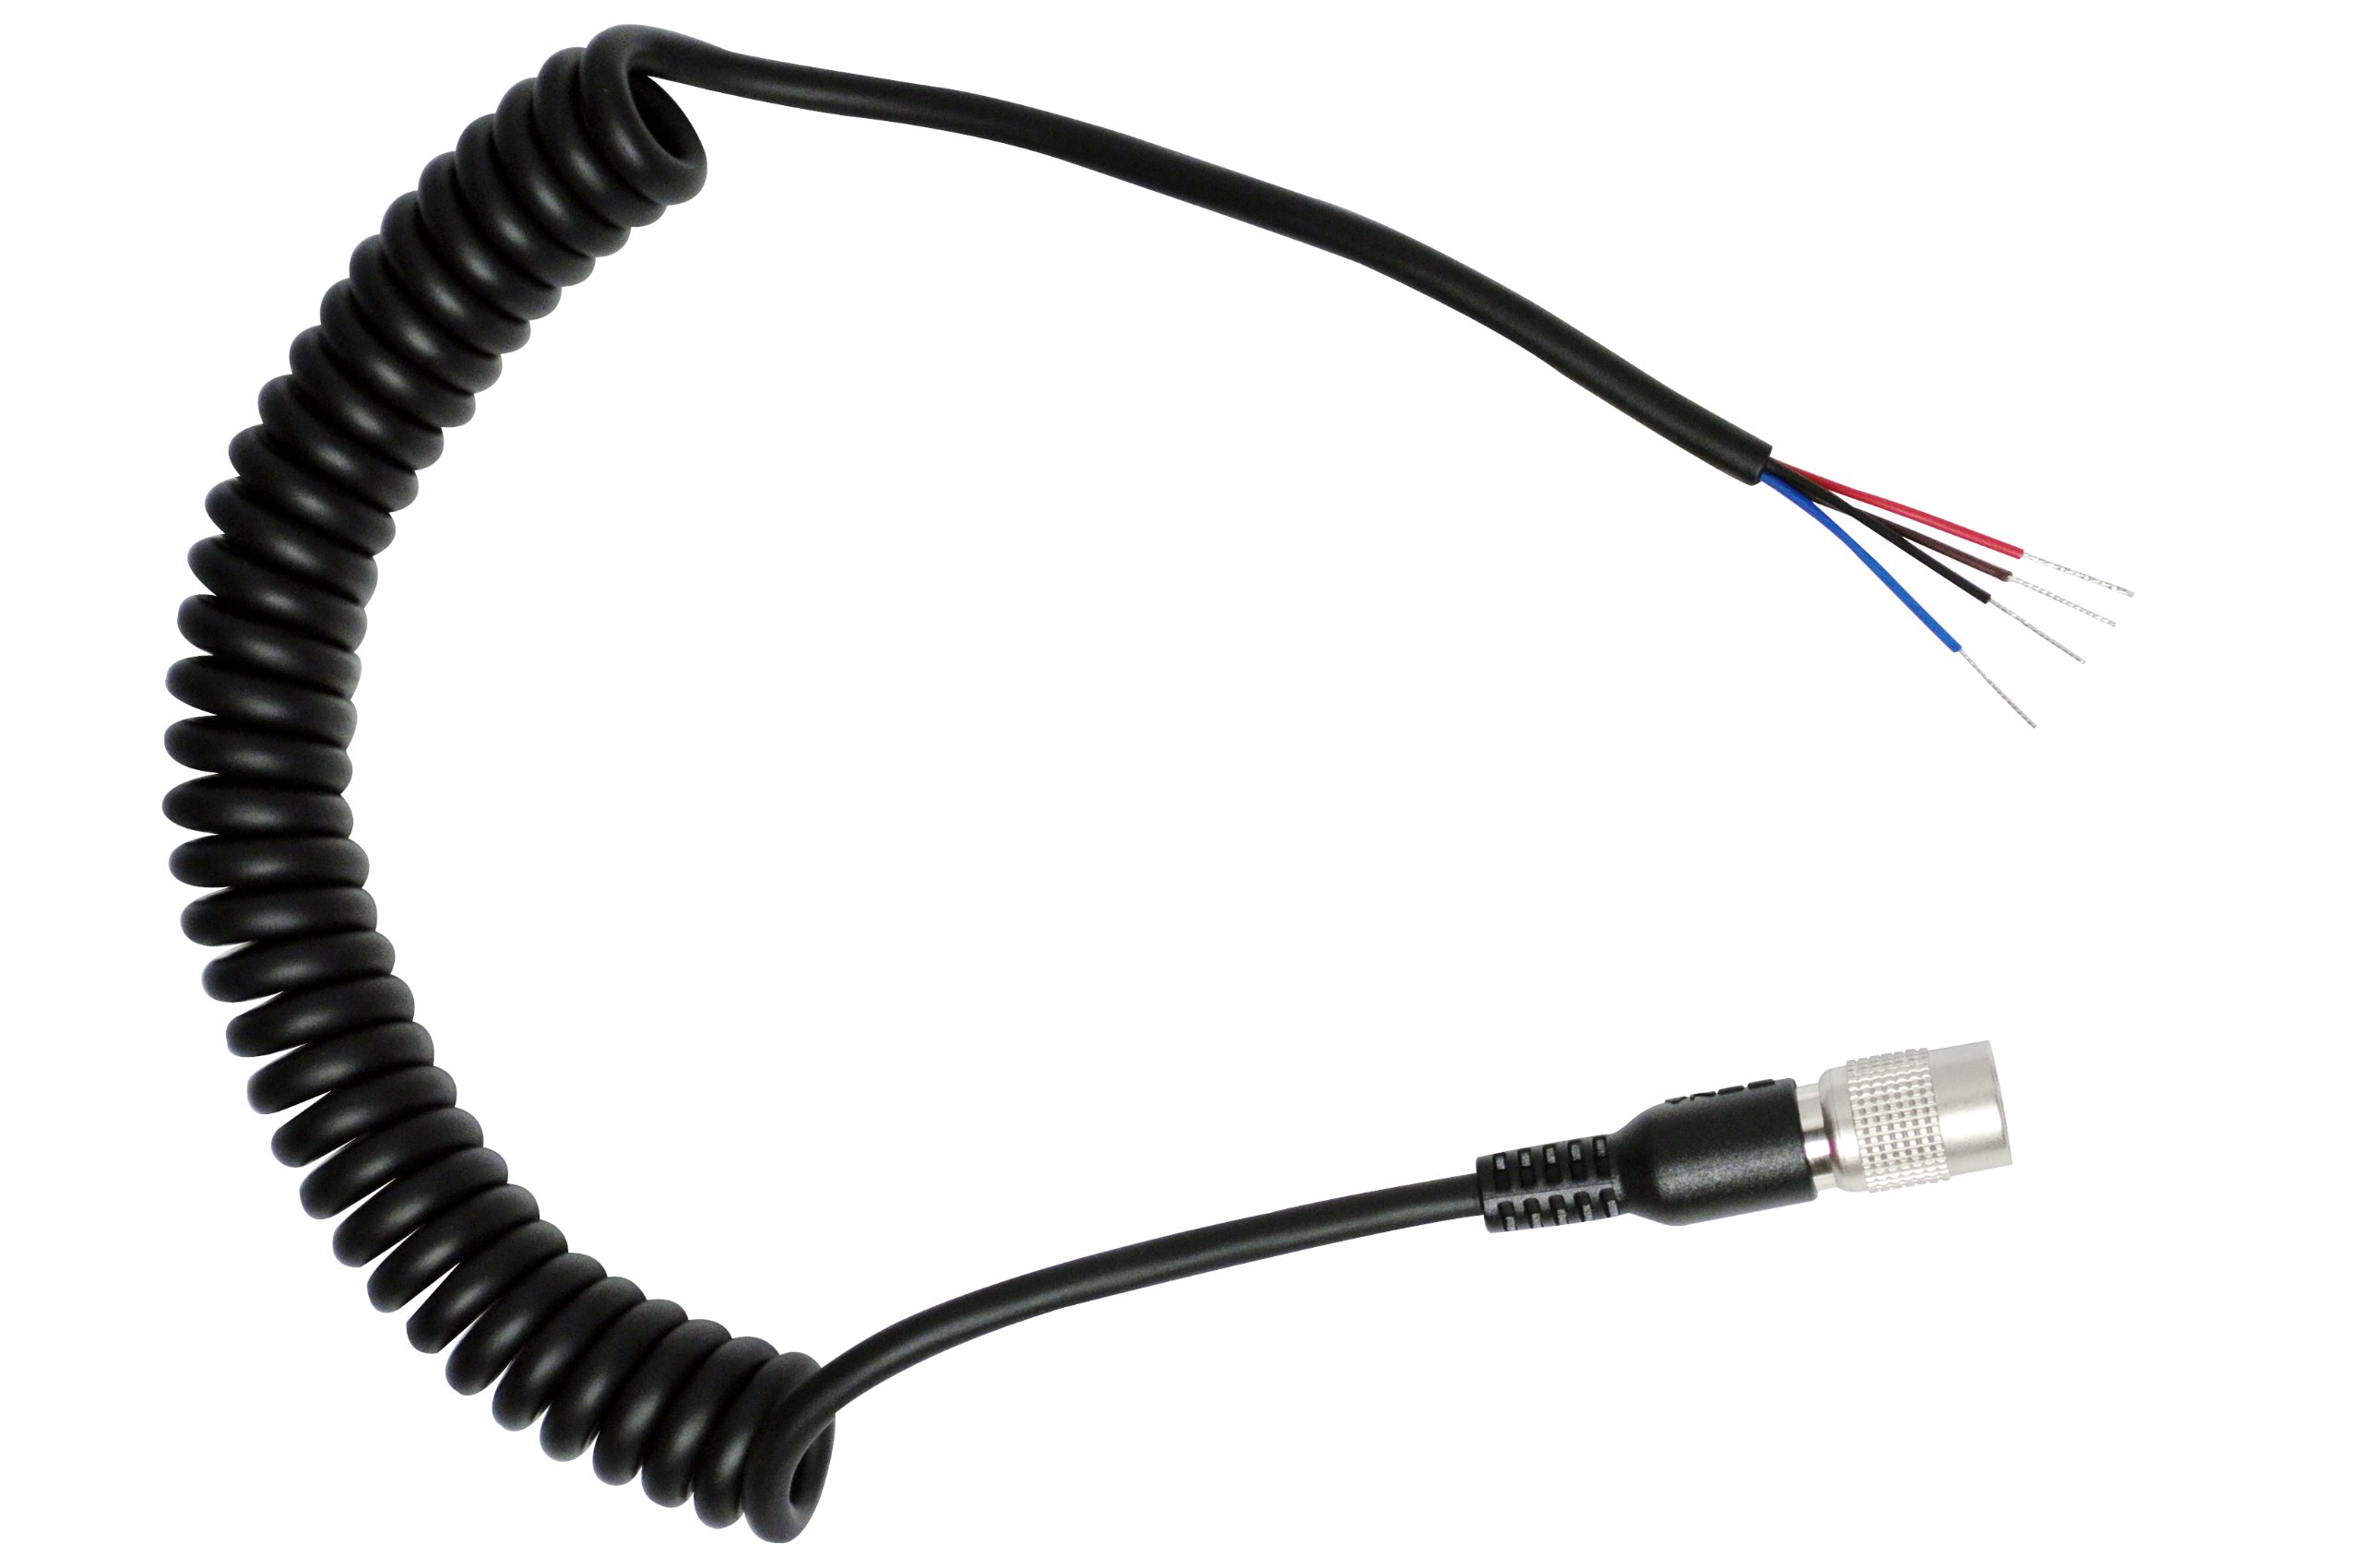 Sena SC-A0116 2-Way Radio Cable with Open-Ended Wiring , Black